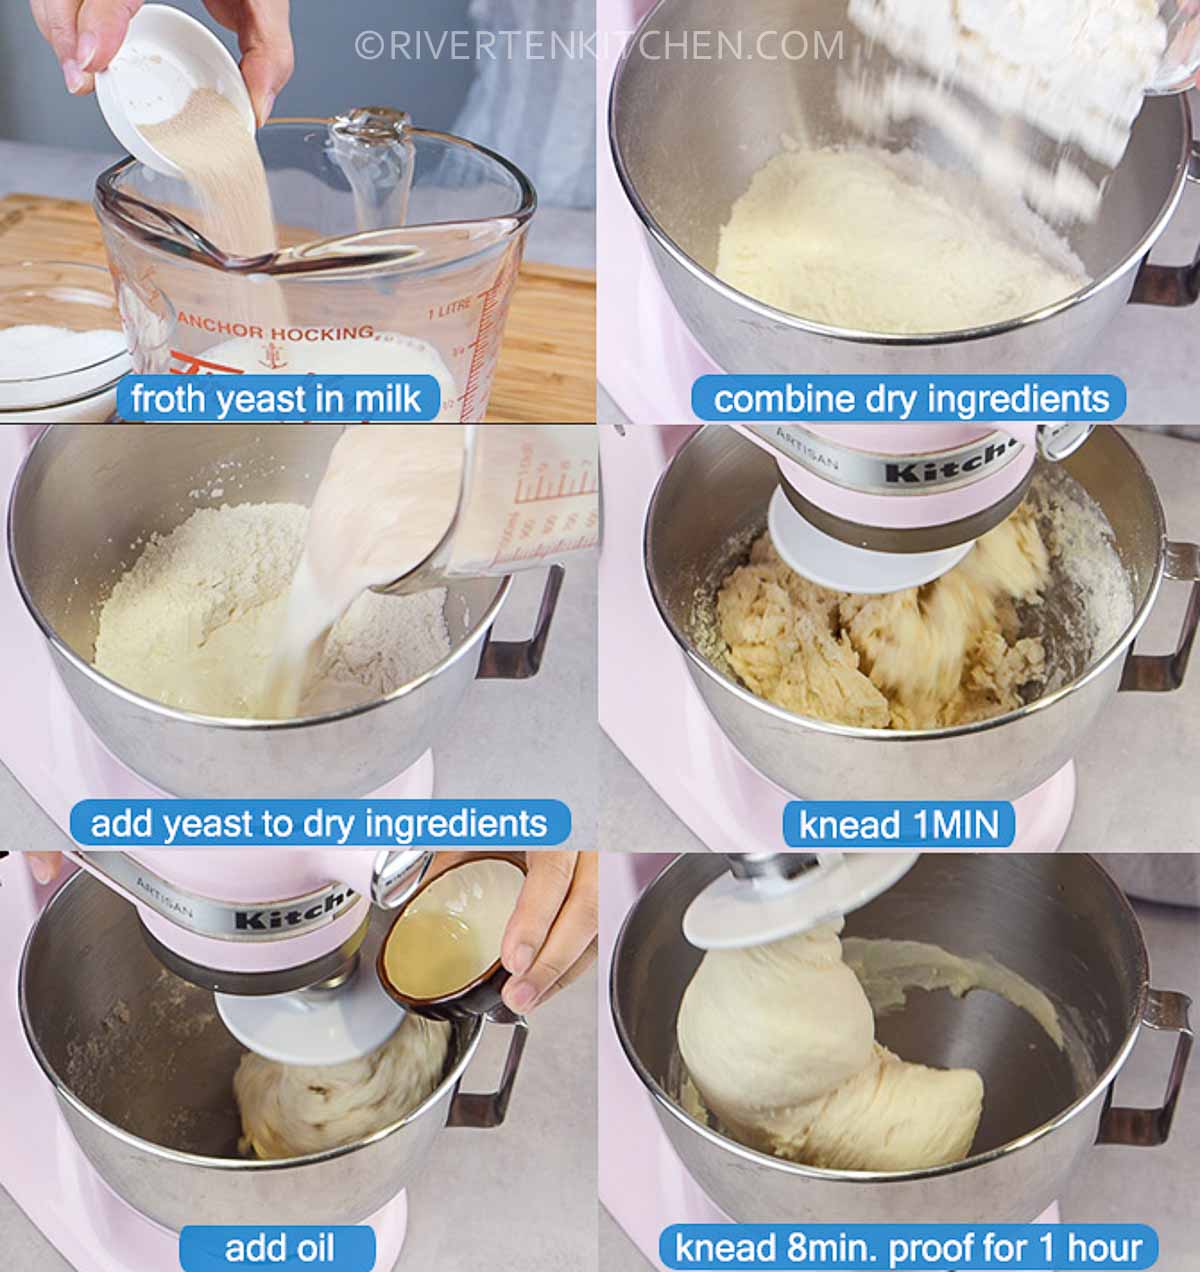 Steps on how to make dough for steamed buns